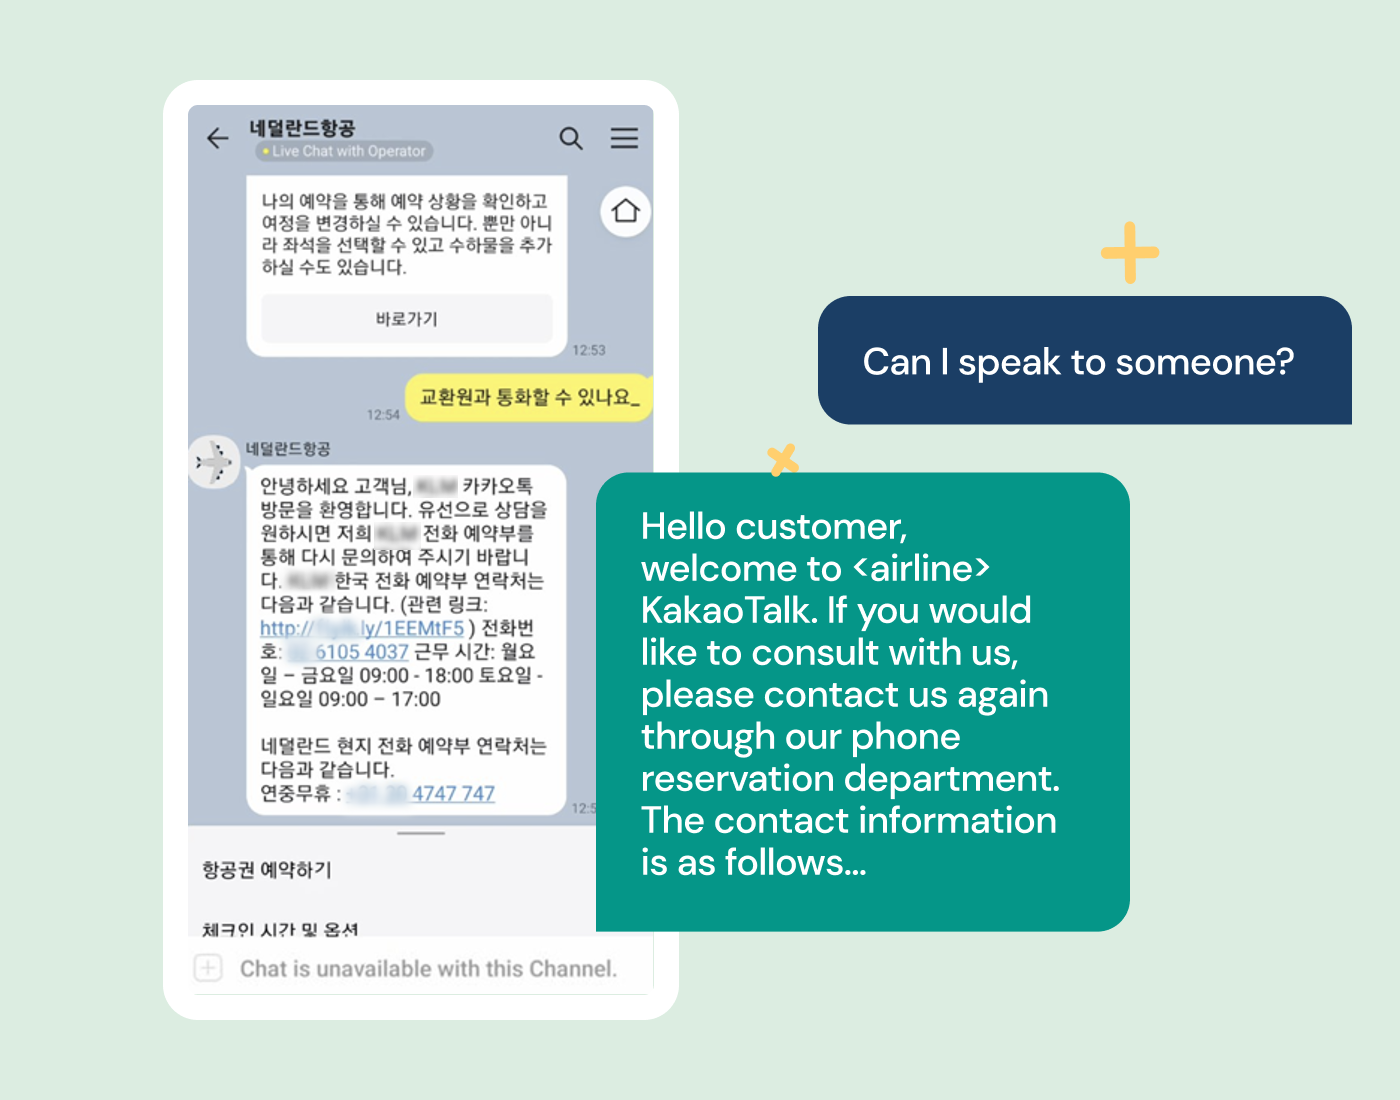 Example of poor customer experience on KakaoTalk